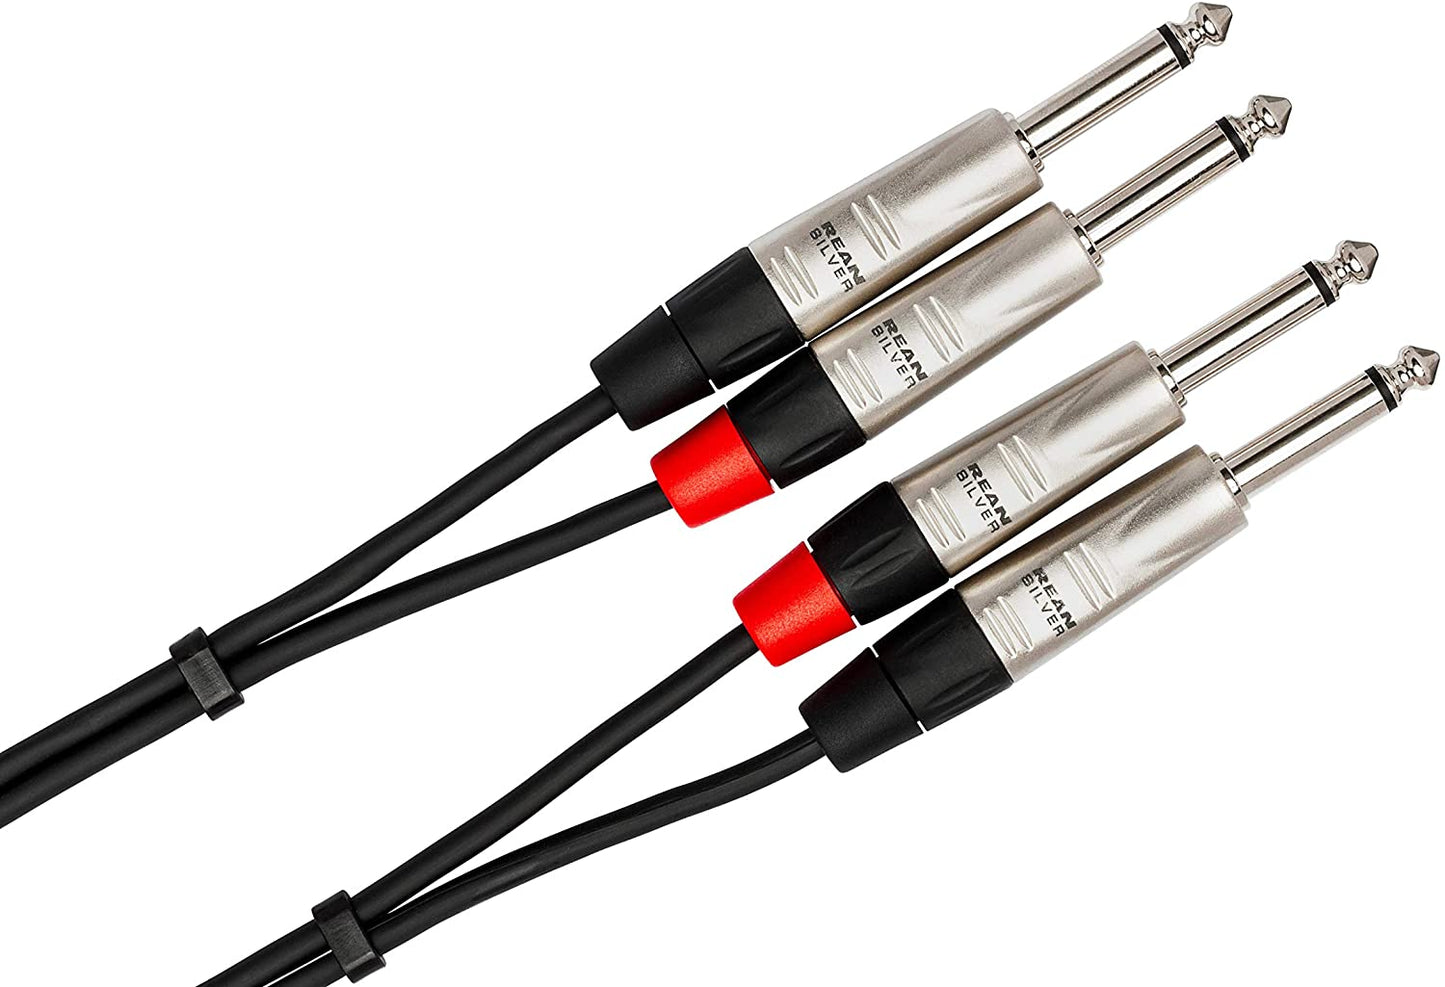 Hosa Technology HPR-0010X2 Dual 1/4" TS Male to Dual RCA Male Stereo Audio Cable (10')